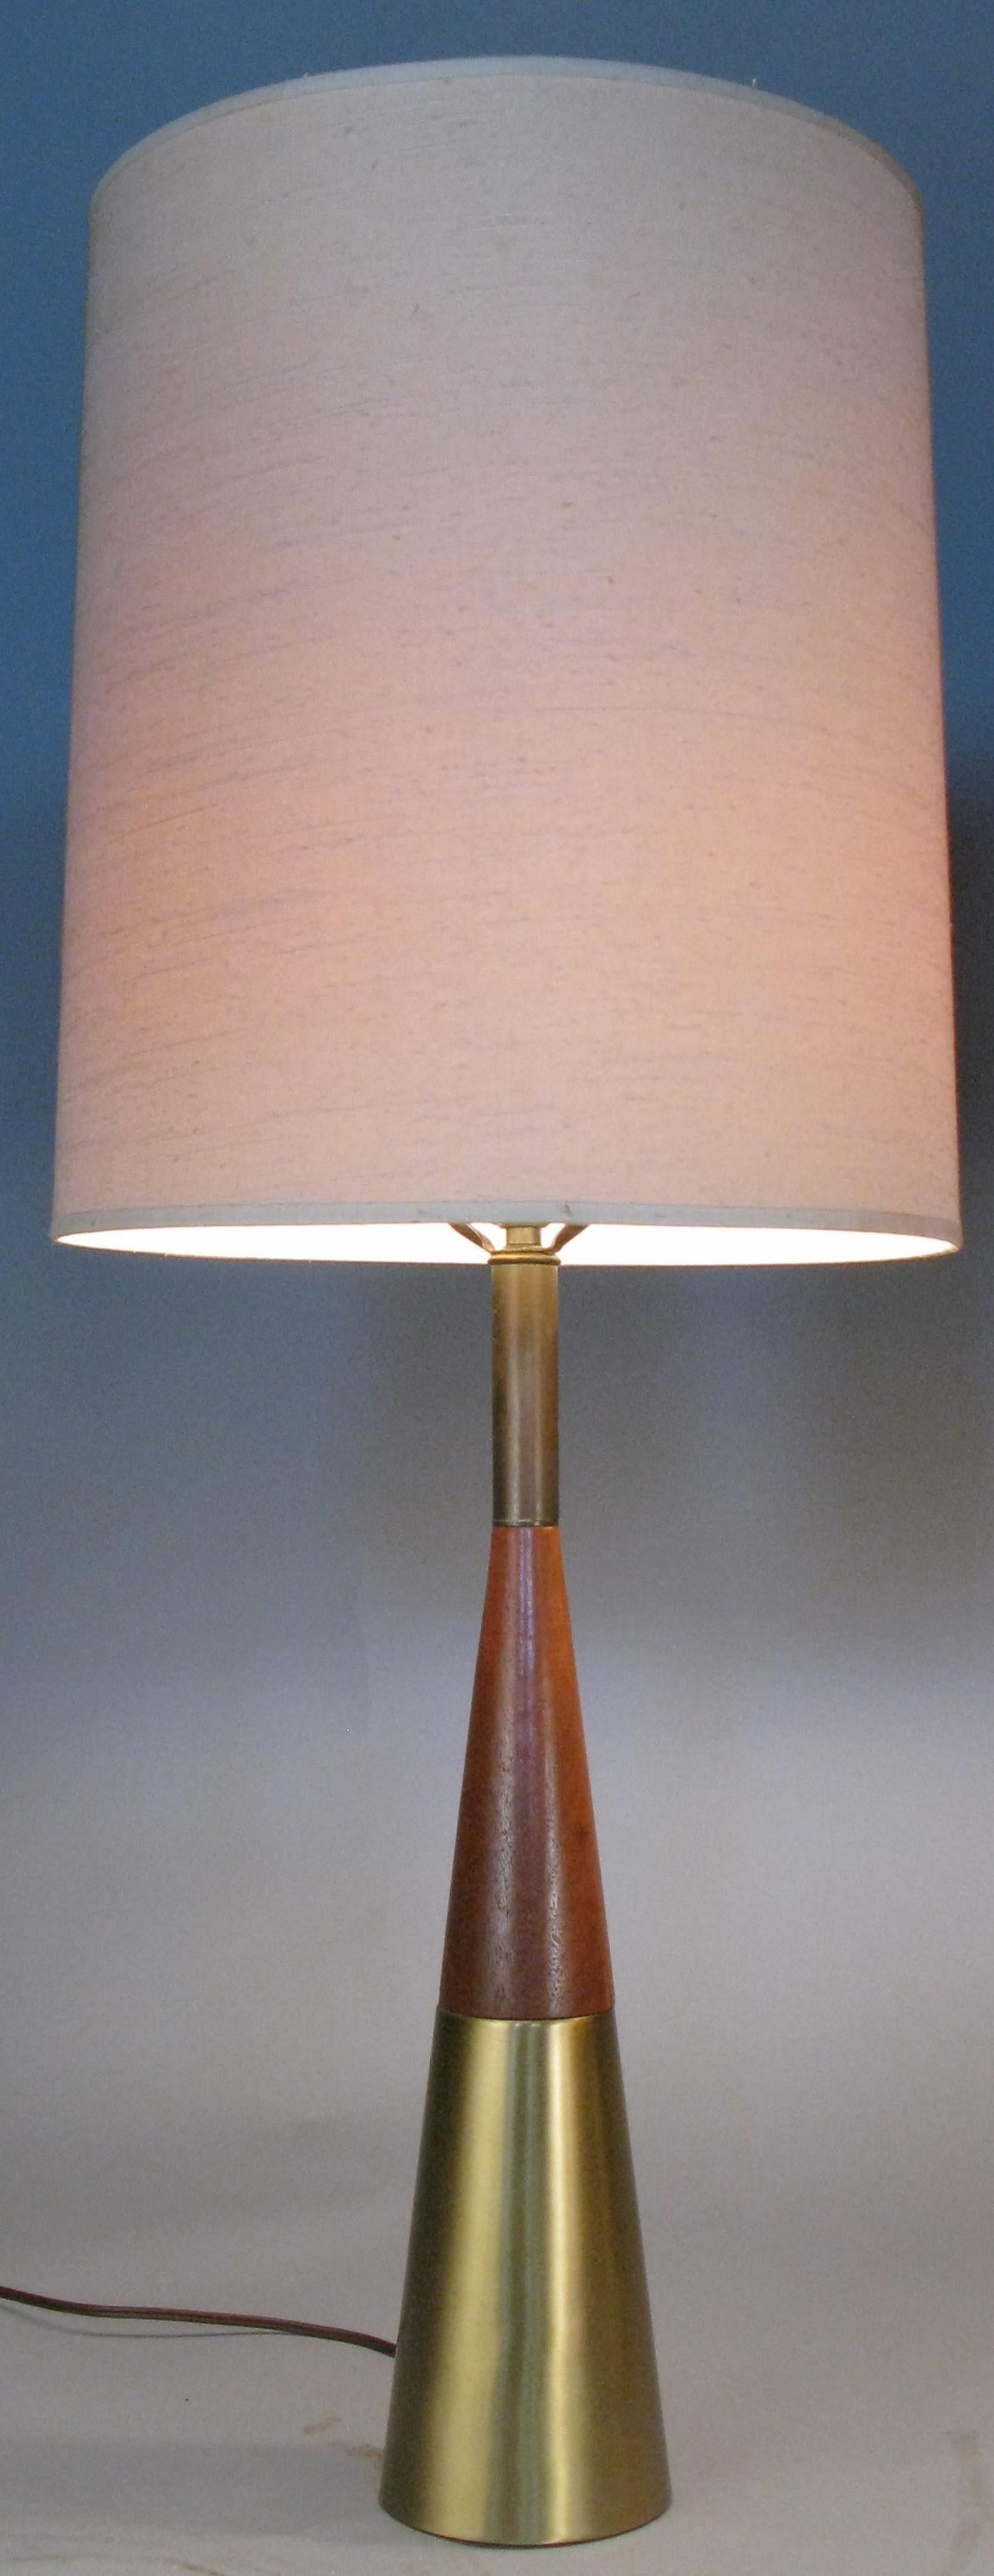 A stunning matched pair of 1950s table lamps designed by Tony Paul. with bases of brushed brass and beautifully figured walnut, these are among the most elegant of Paul's lamp designs from the mid 20th century. Beautiful tapered form and with their